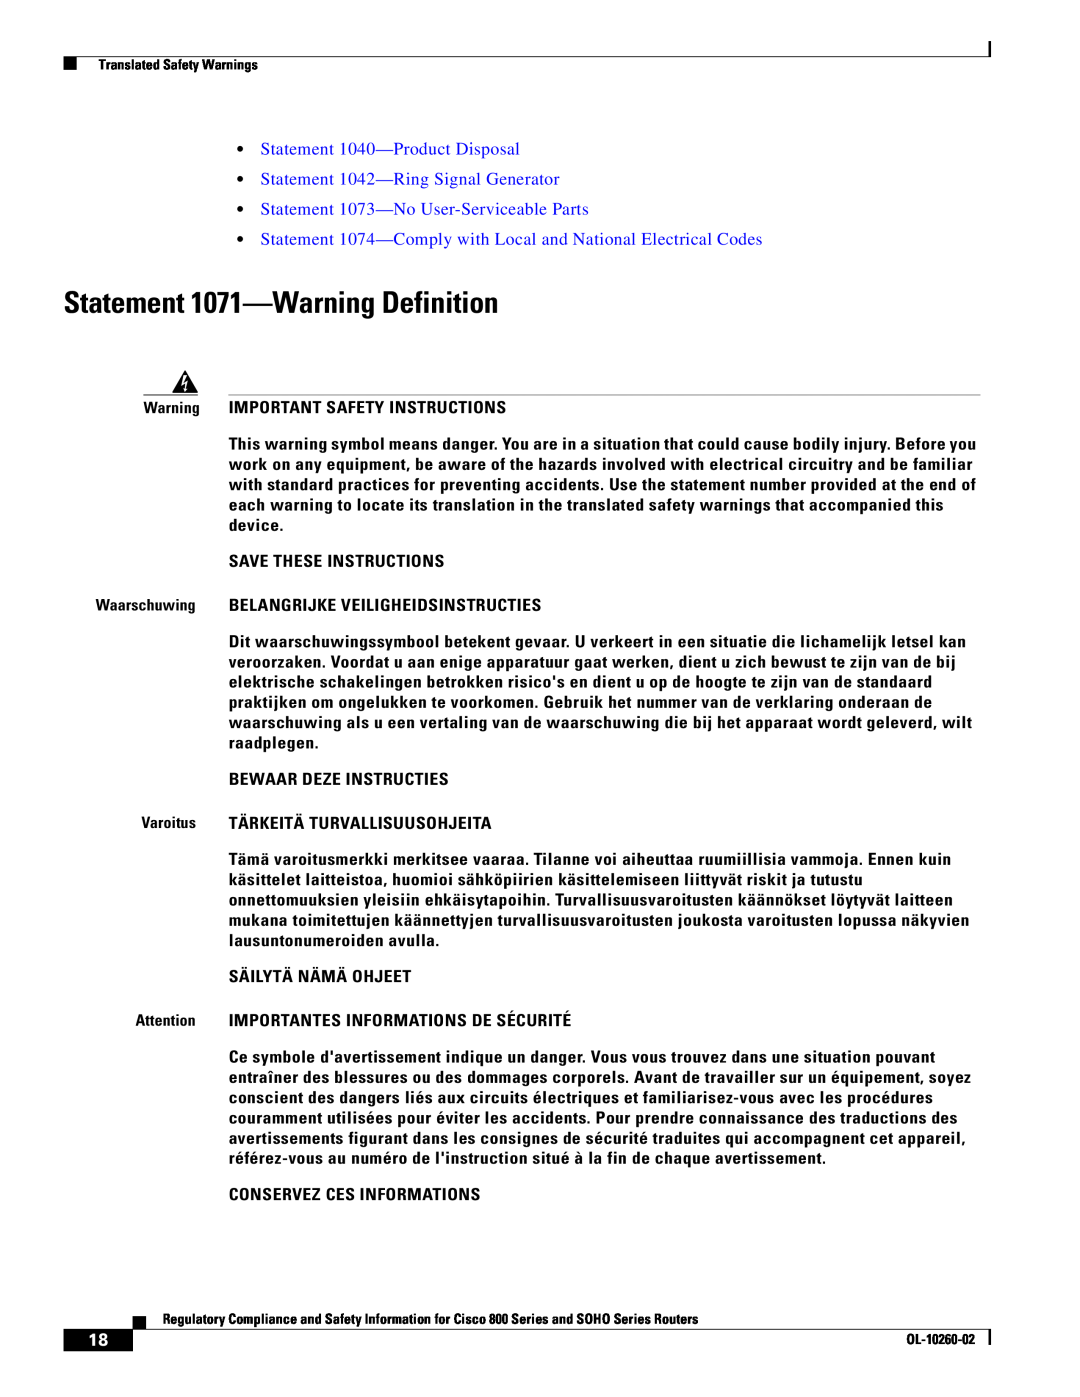 Cisco Systems SOHO Series manual Statement 1071-Warning Definition, Statement 1073-No User-Serviceable Parts 